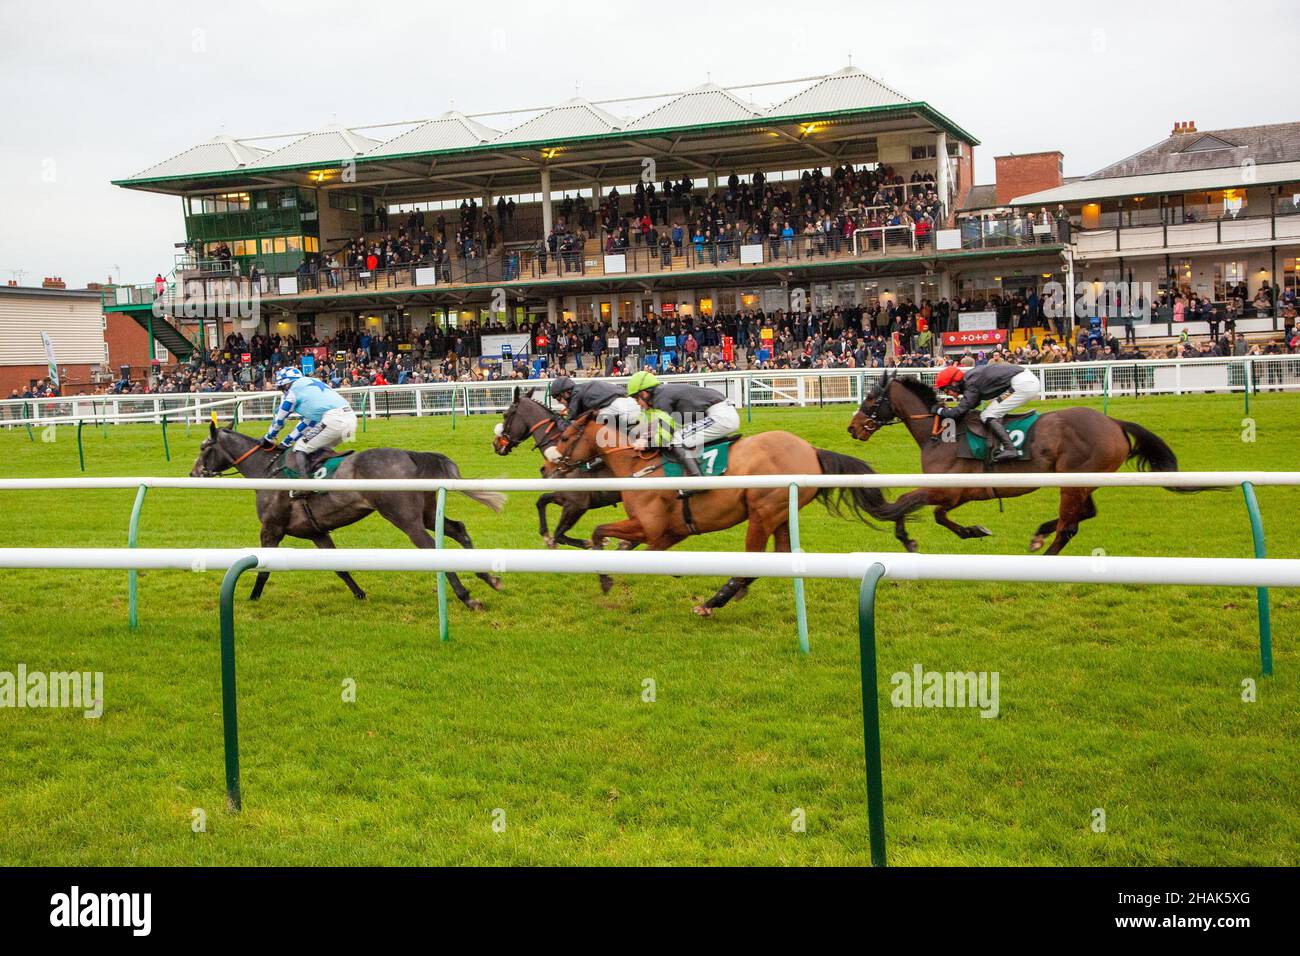 National hunt horse racing at Warwick racecourse England with action in front of the main stand taken from the  caravan and motor home club site 2021 Stock Photo